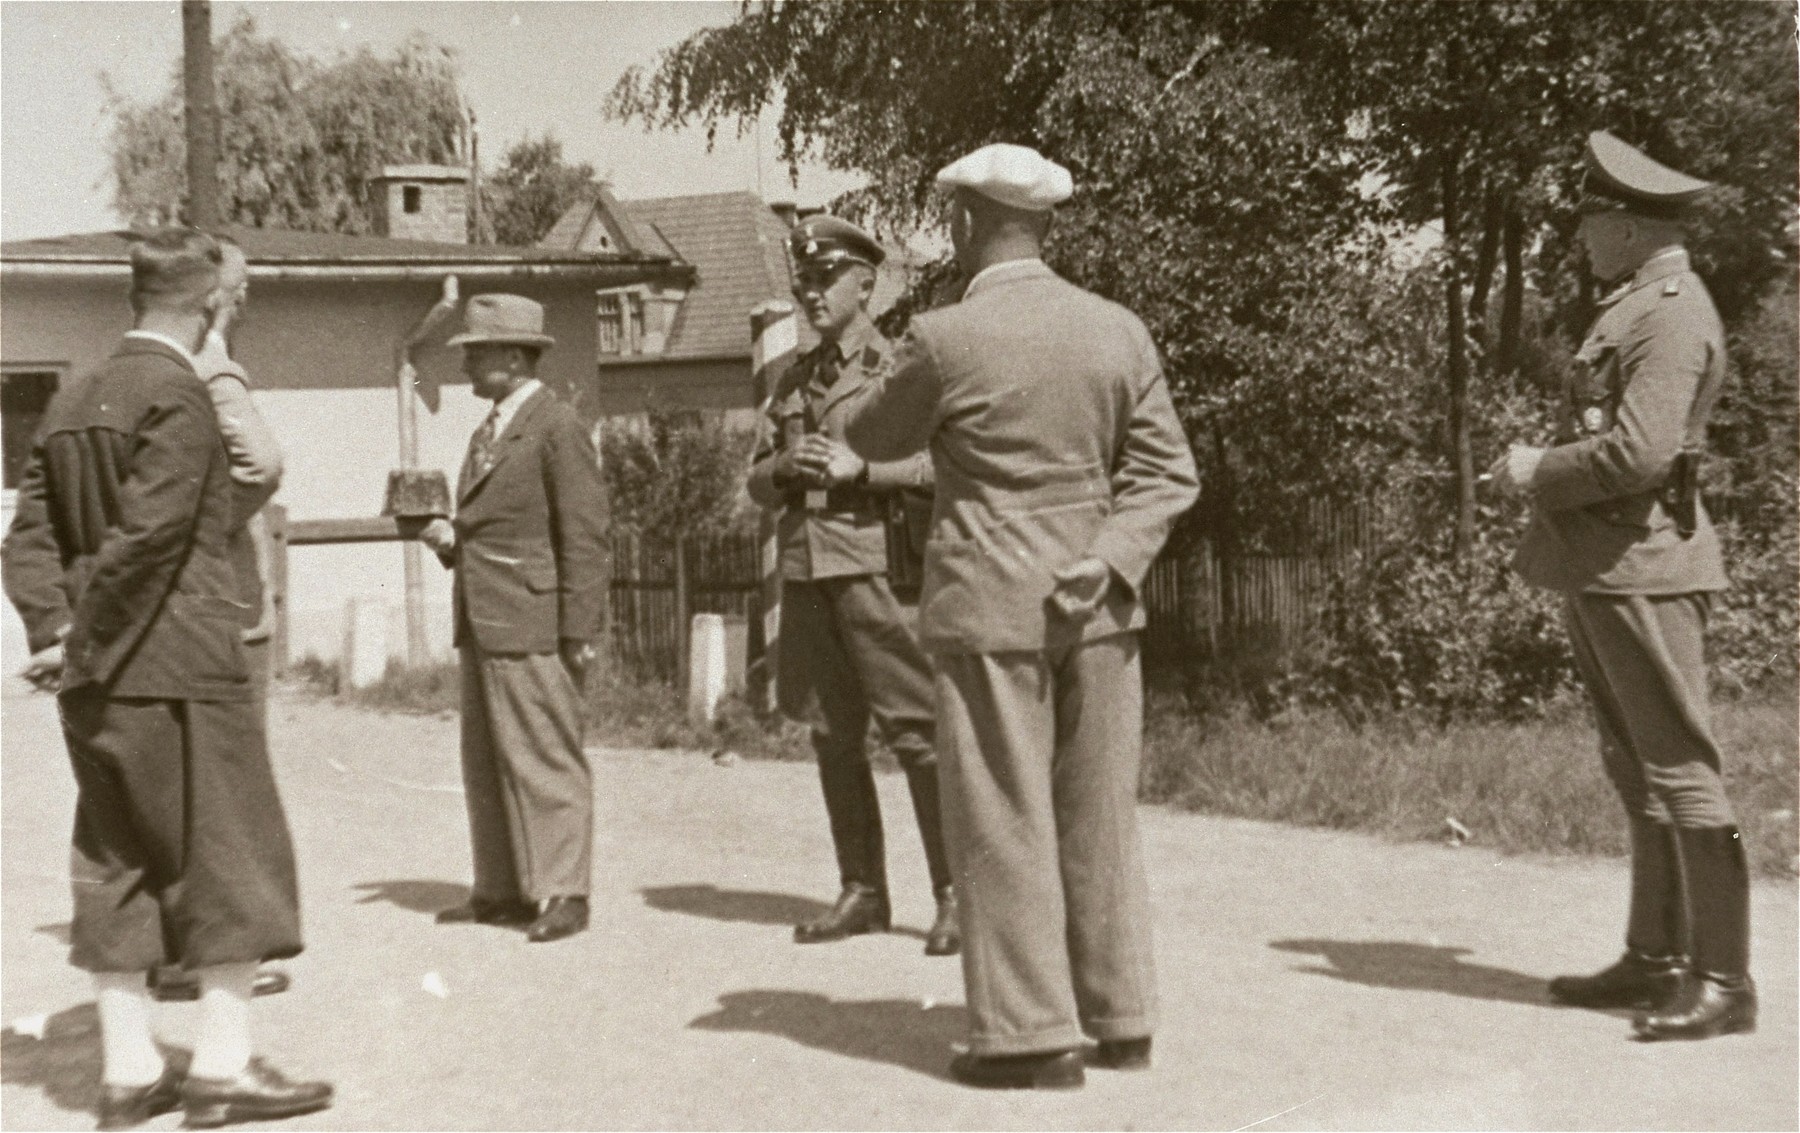 [Probably, SD officers questioning the ethnic German (Volksdeutsche) inhabitants of a Polish town.]  

It was standard practice during the Polish campaign for the SD and German military to question local ethnic Germans for information pertaining to Poles considered Deutschfeindlich, or "hostile to Germans."  Poles and Jews named during such interviews were then arrested as suspected opponents and either shot or sent to the rear for internment. 

One image of Einsatzgruppen activities in Poland in 1939, found by Joseph Igra after the war, in a an album in an apartment in Sosnowiec.